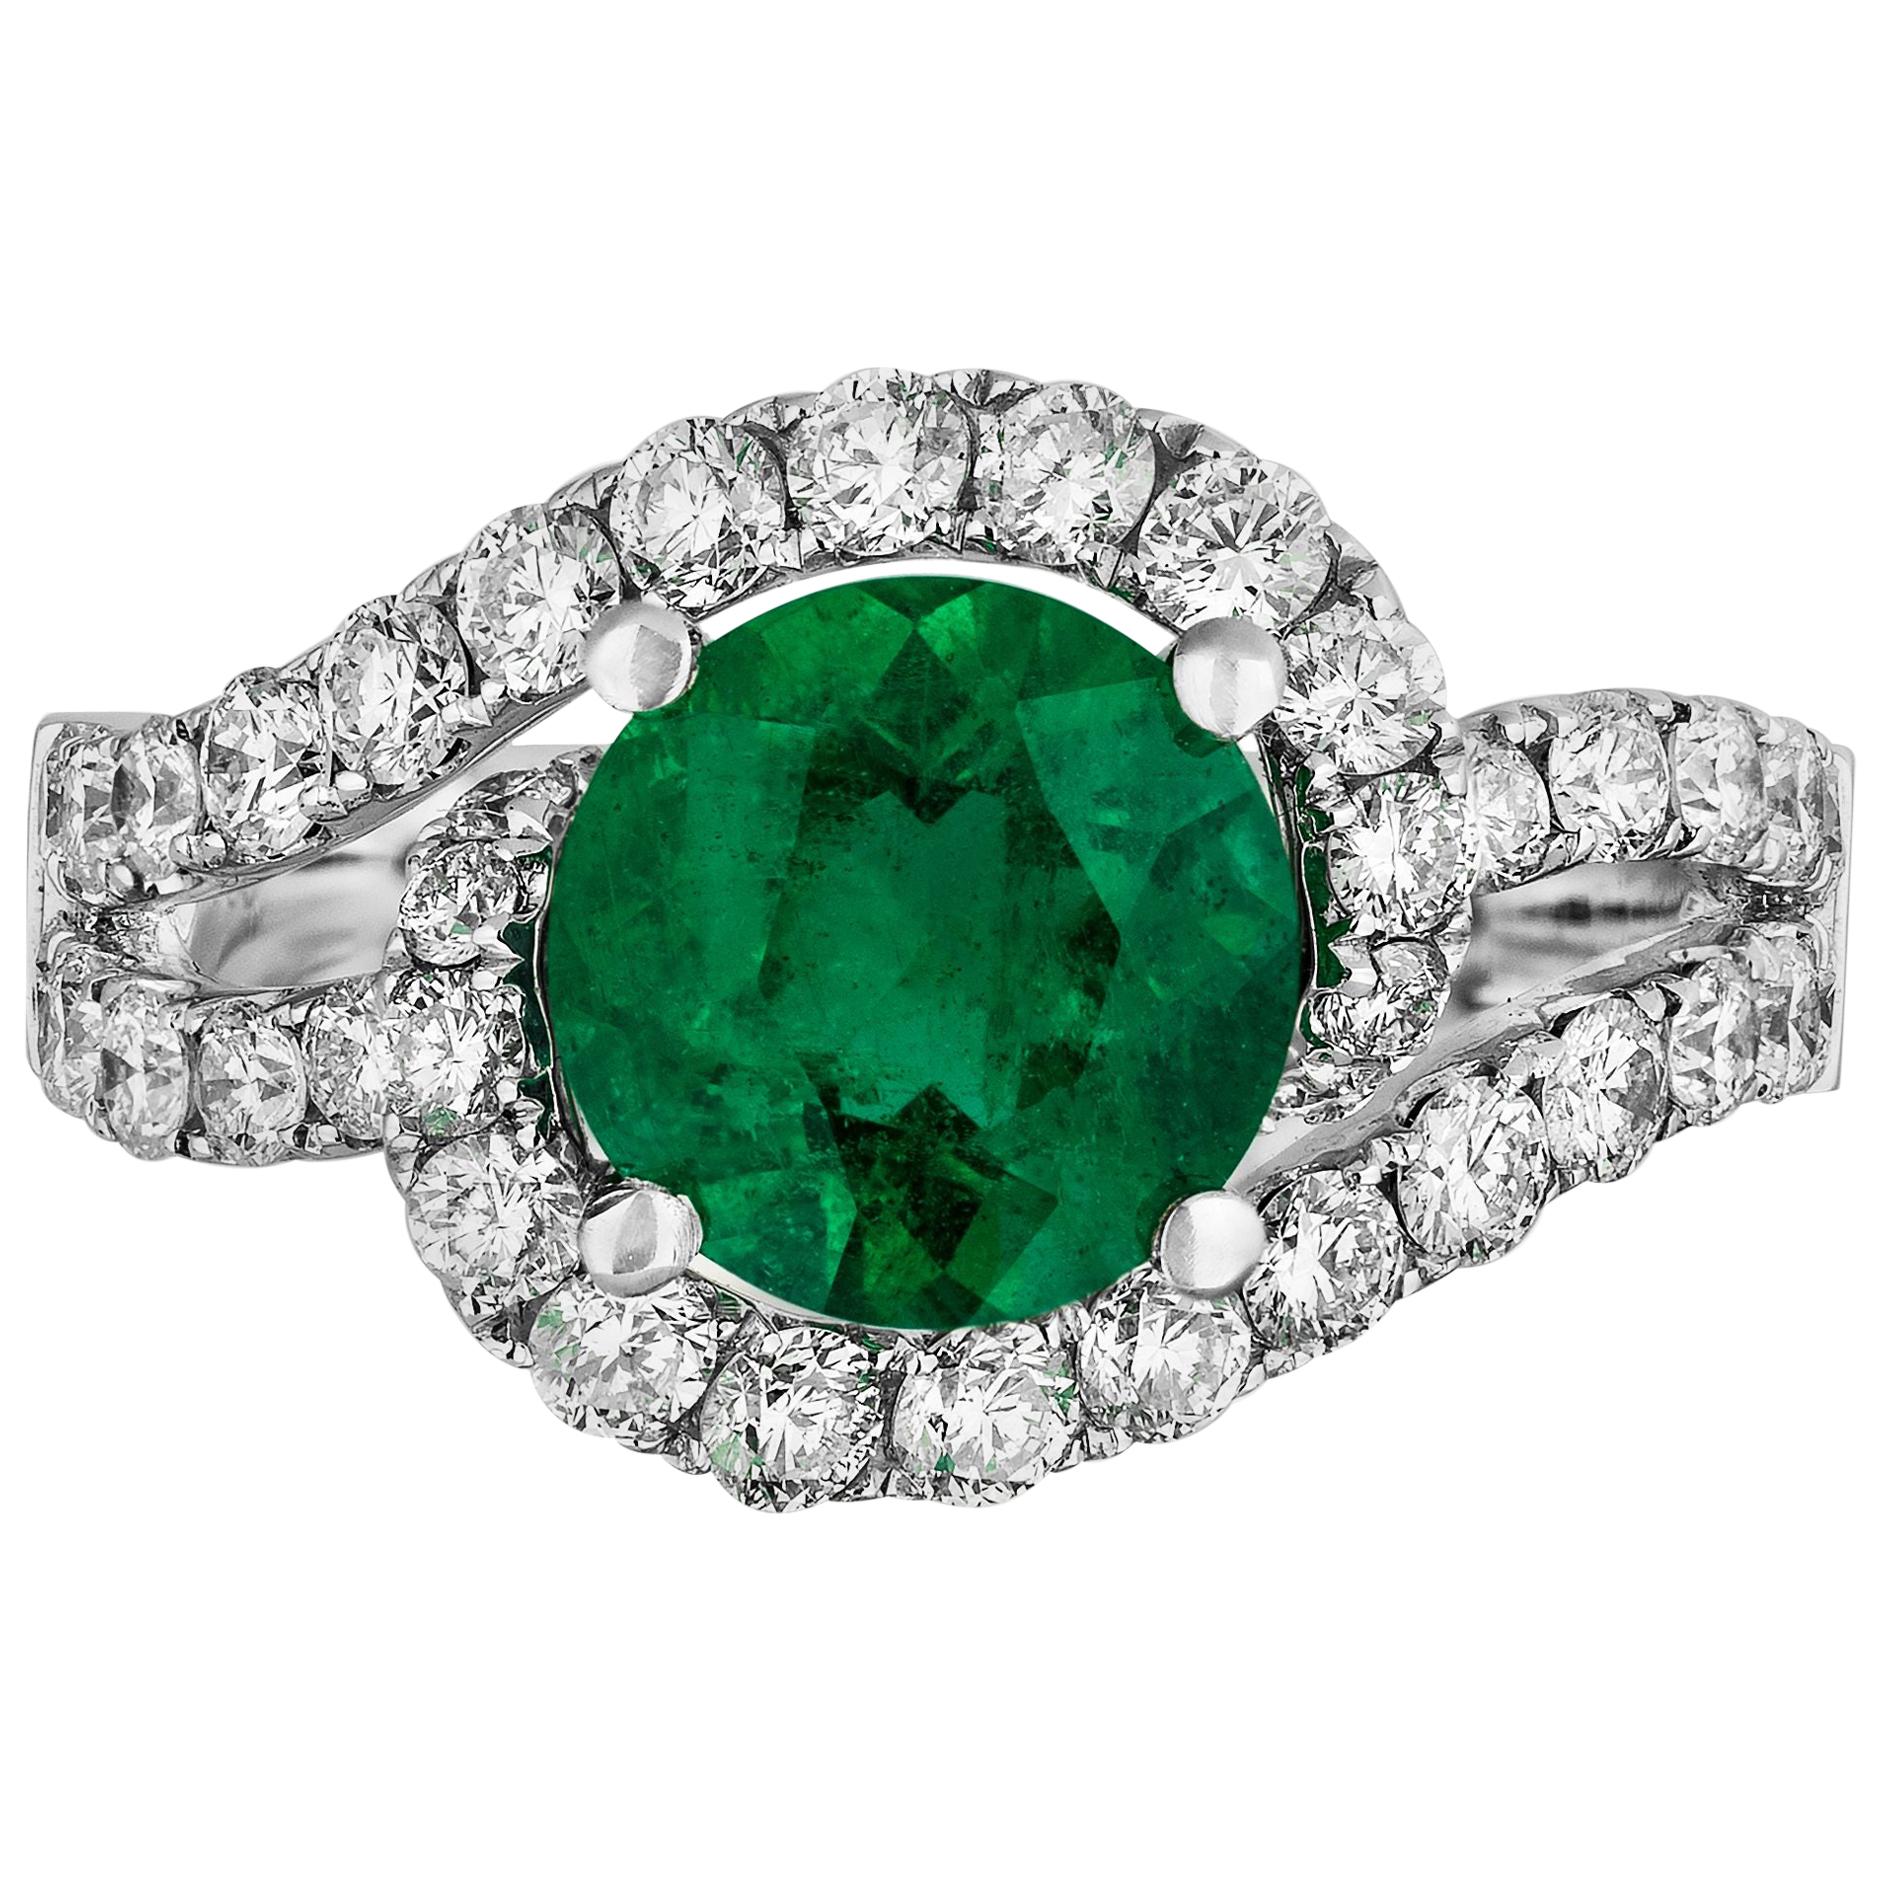 1.88 Carat Emerald Diamond Cocktail Ring For Sale